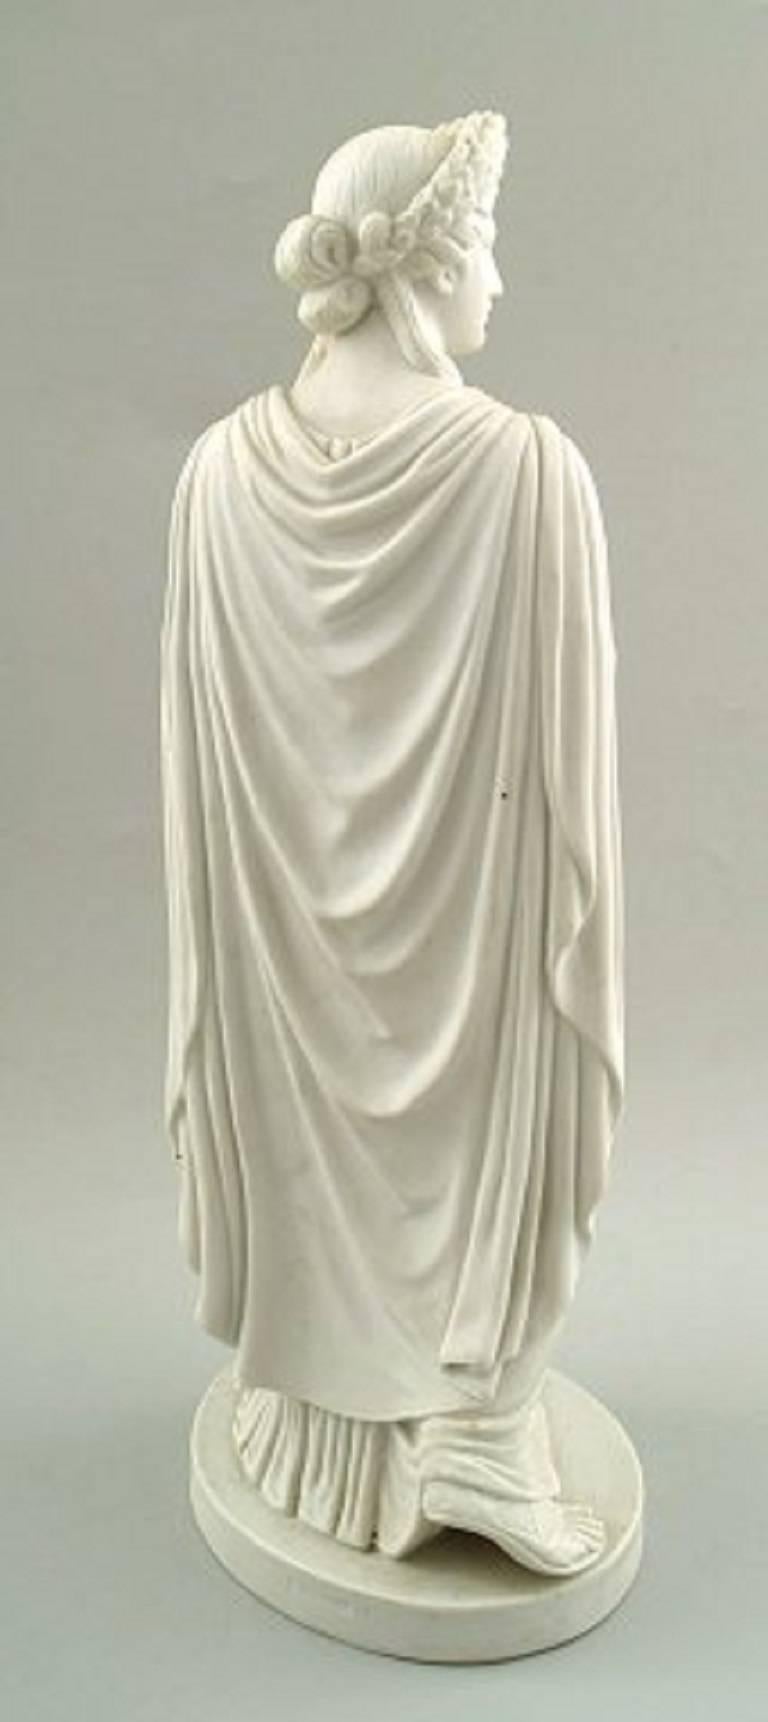 Neoclassical Rare and Large Antique B&G / Bing & Grondahl Bisque Apollon Figure